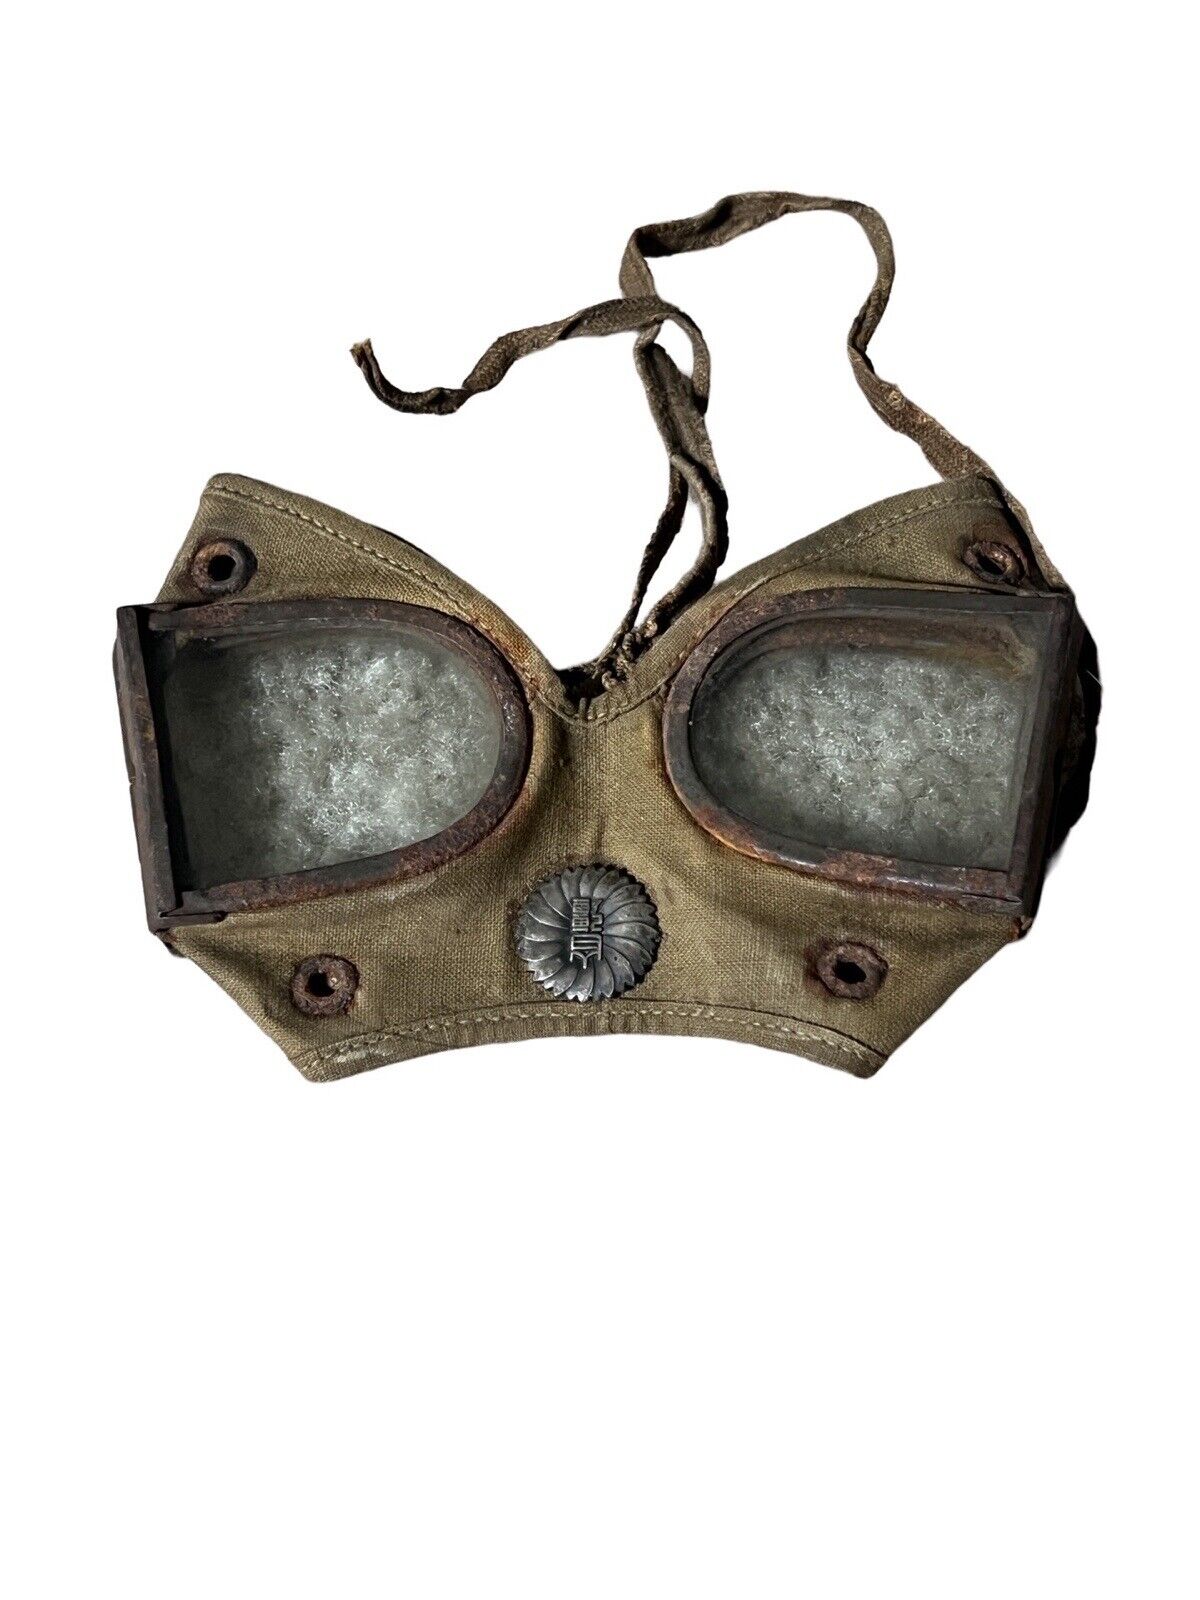 WW2 WWII Japanese Military Army Foldable Goggles Dust And Wind Proof ? Pilot